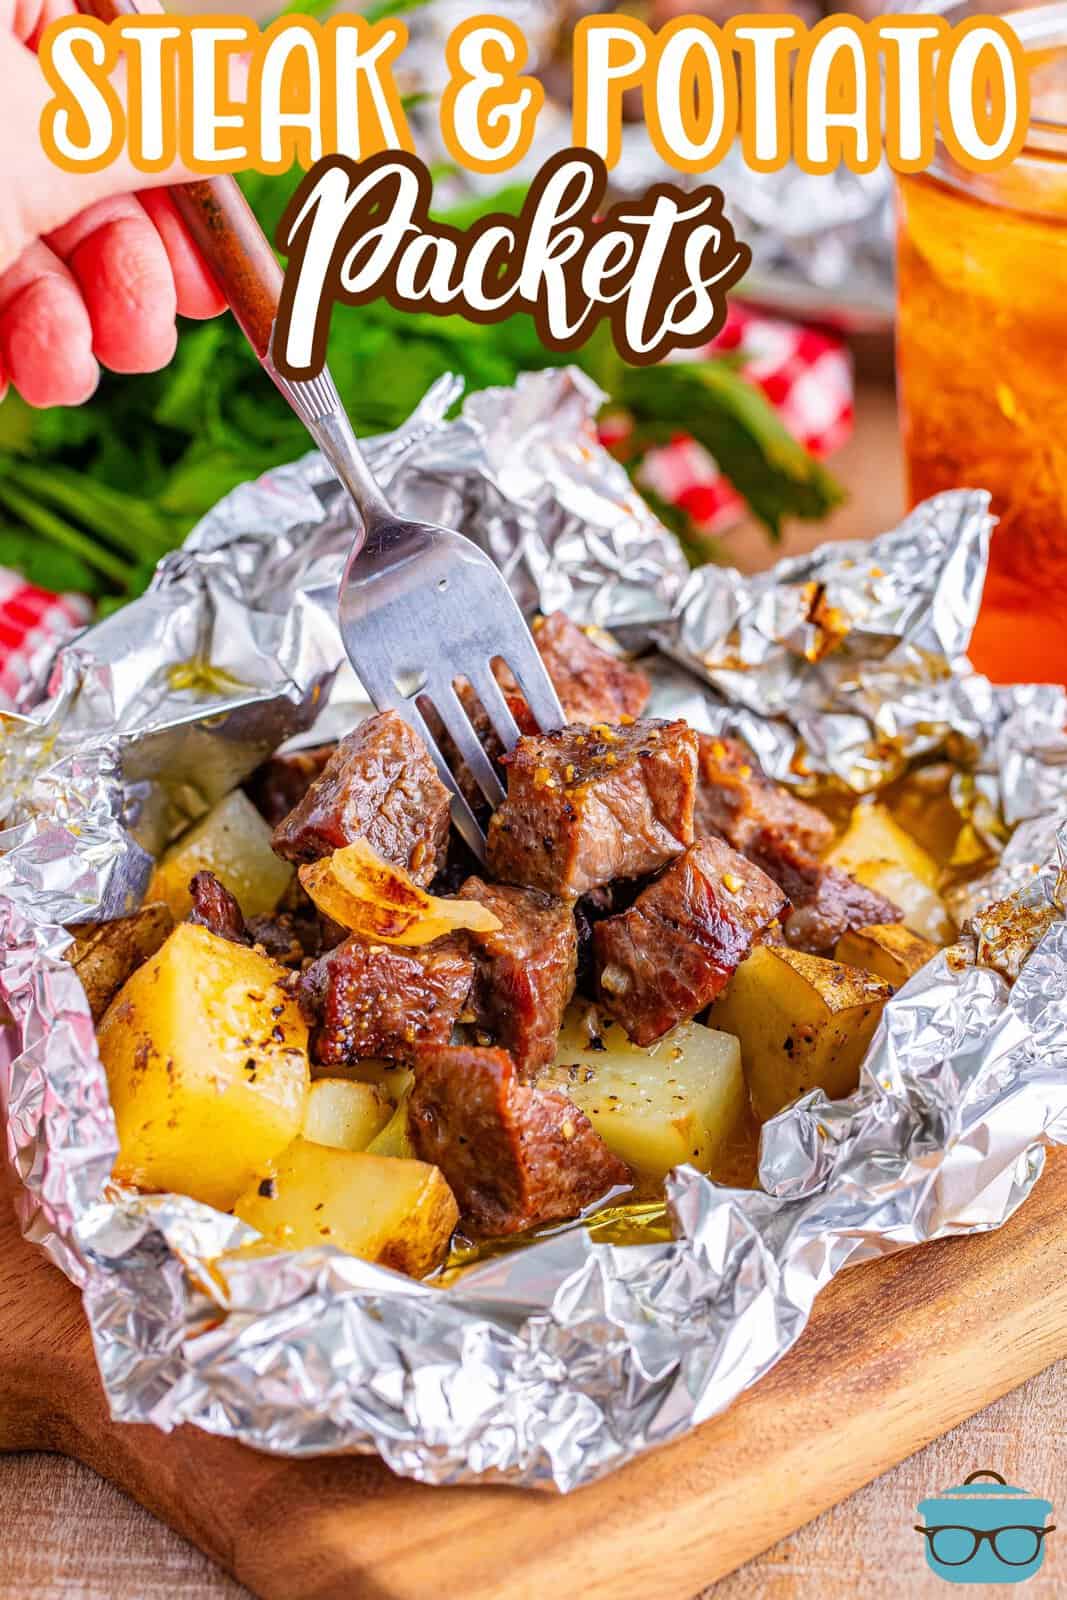 https://www.thecountrycook.net/wp-content/uploads/2019/05/main-image-Steak-and-Potato-Packets-hobo-packets-scaled.jpg